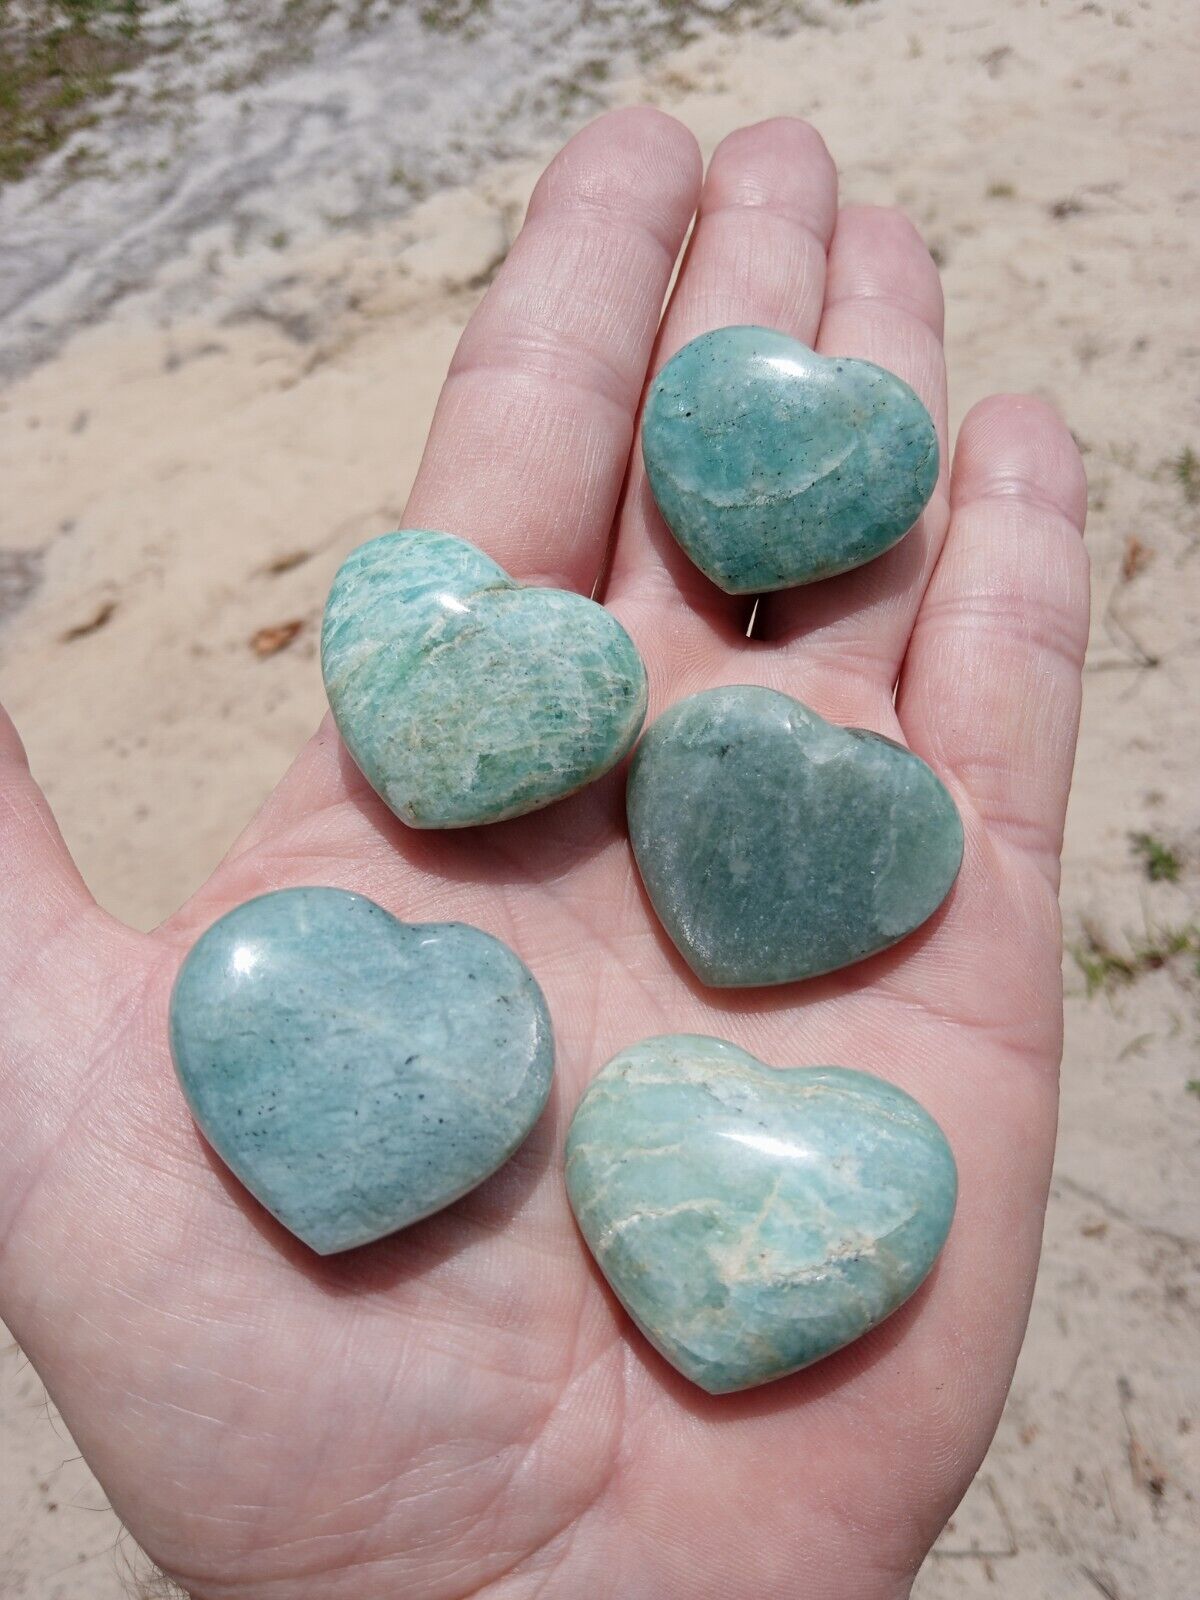 Lot of 5 Stunning Small Polished Amazonite Hearts Mineral Specimens Healing X2